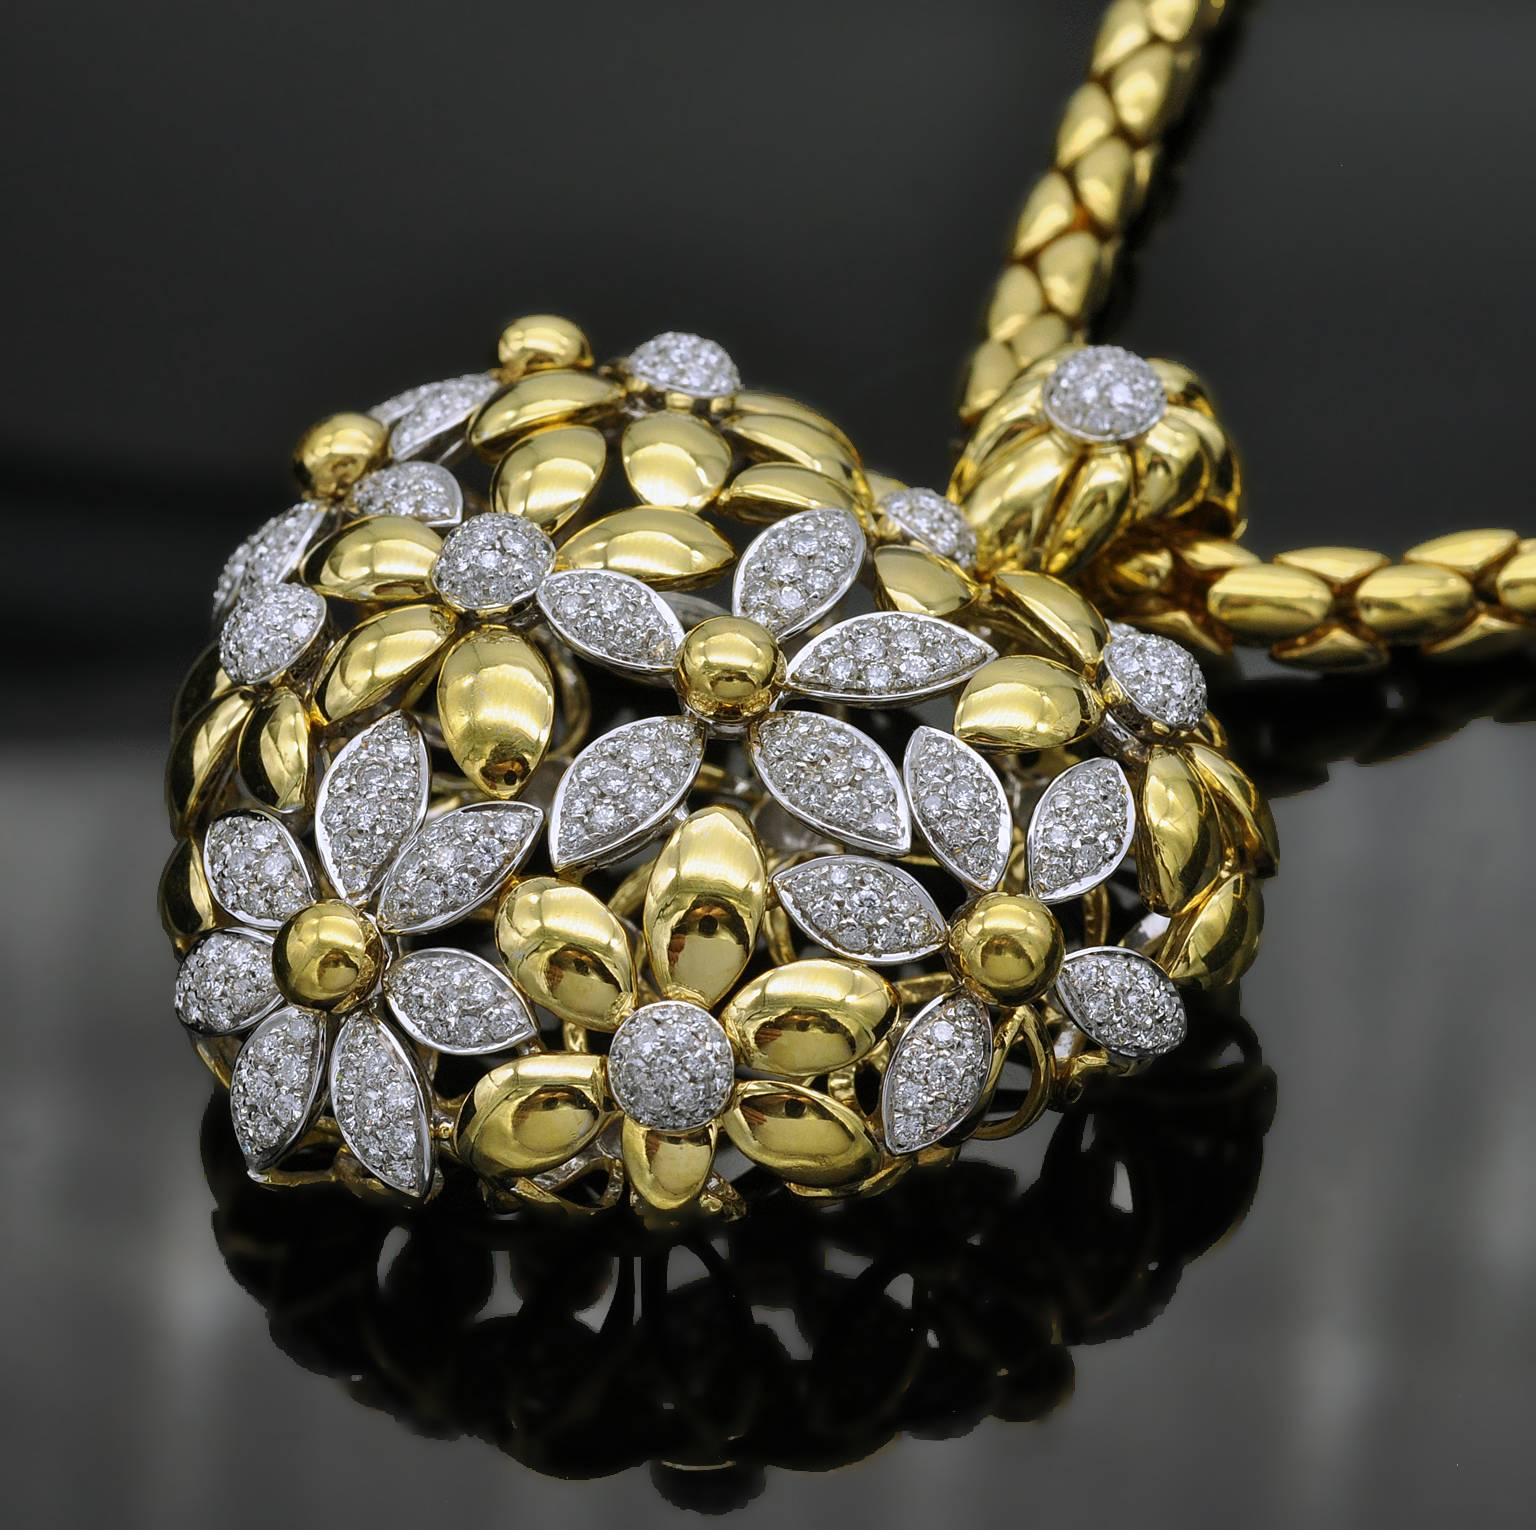 Superb and opulent puff heart pendant made out of flowers ! Shiny 18 kt gold and white diamond make a chic contrast. Beautiful make . The hoop open thanks to a discreet and sturdy system allowing heart to be attached to many different bands ( gold